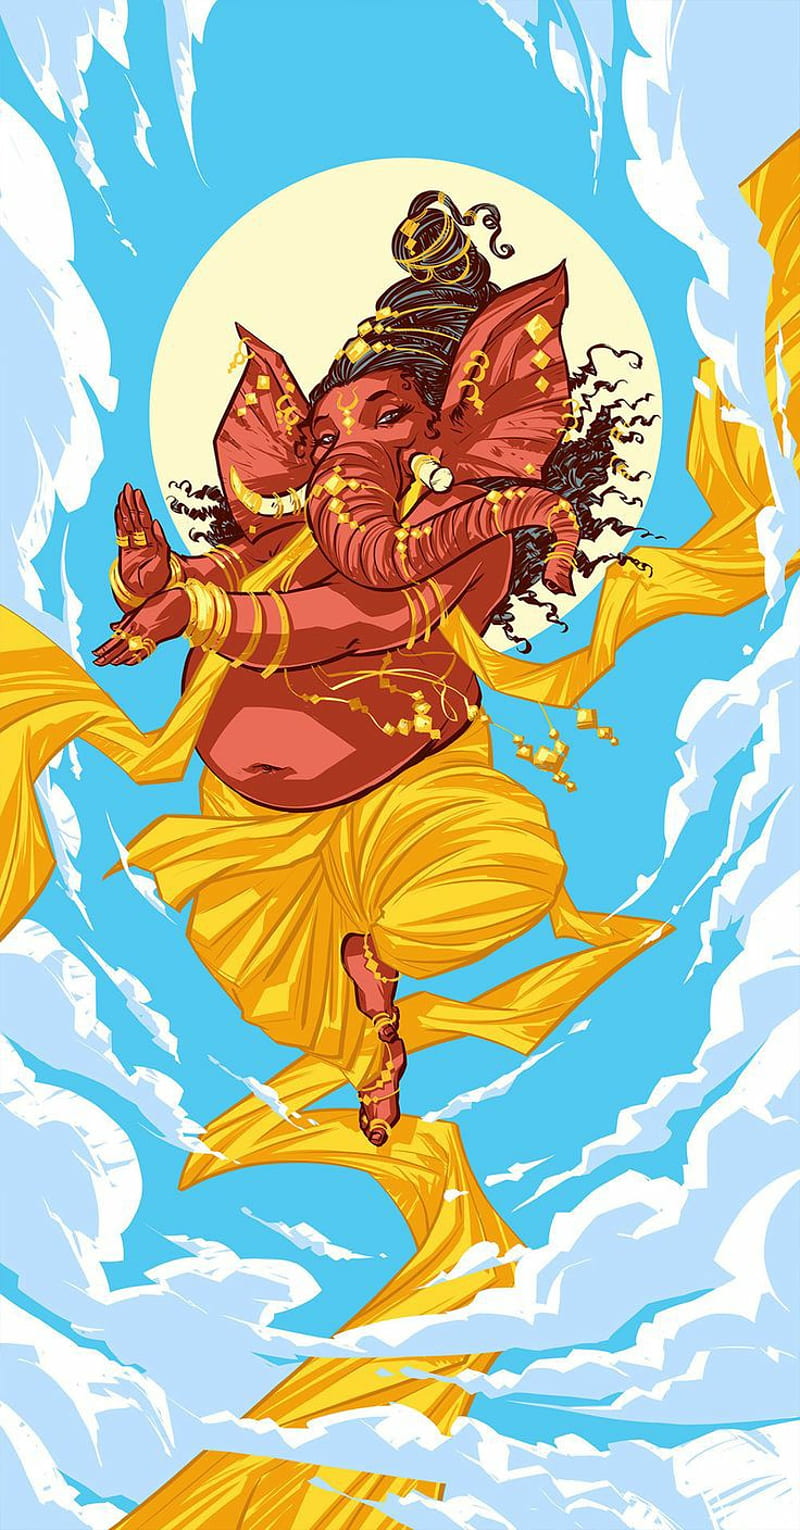 What are the eight forms of Lord Ganesha? - Jiwan Jyoti - Quora